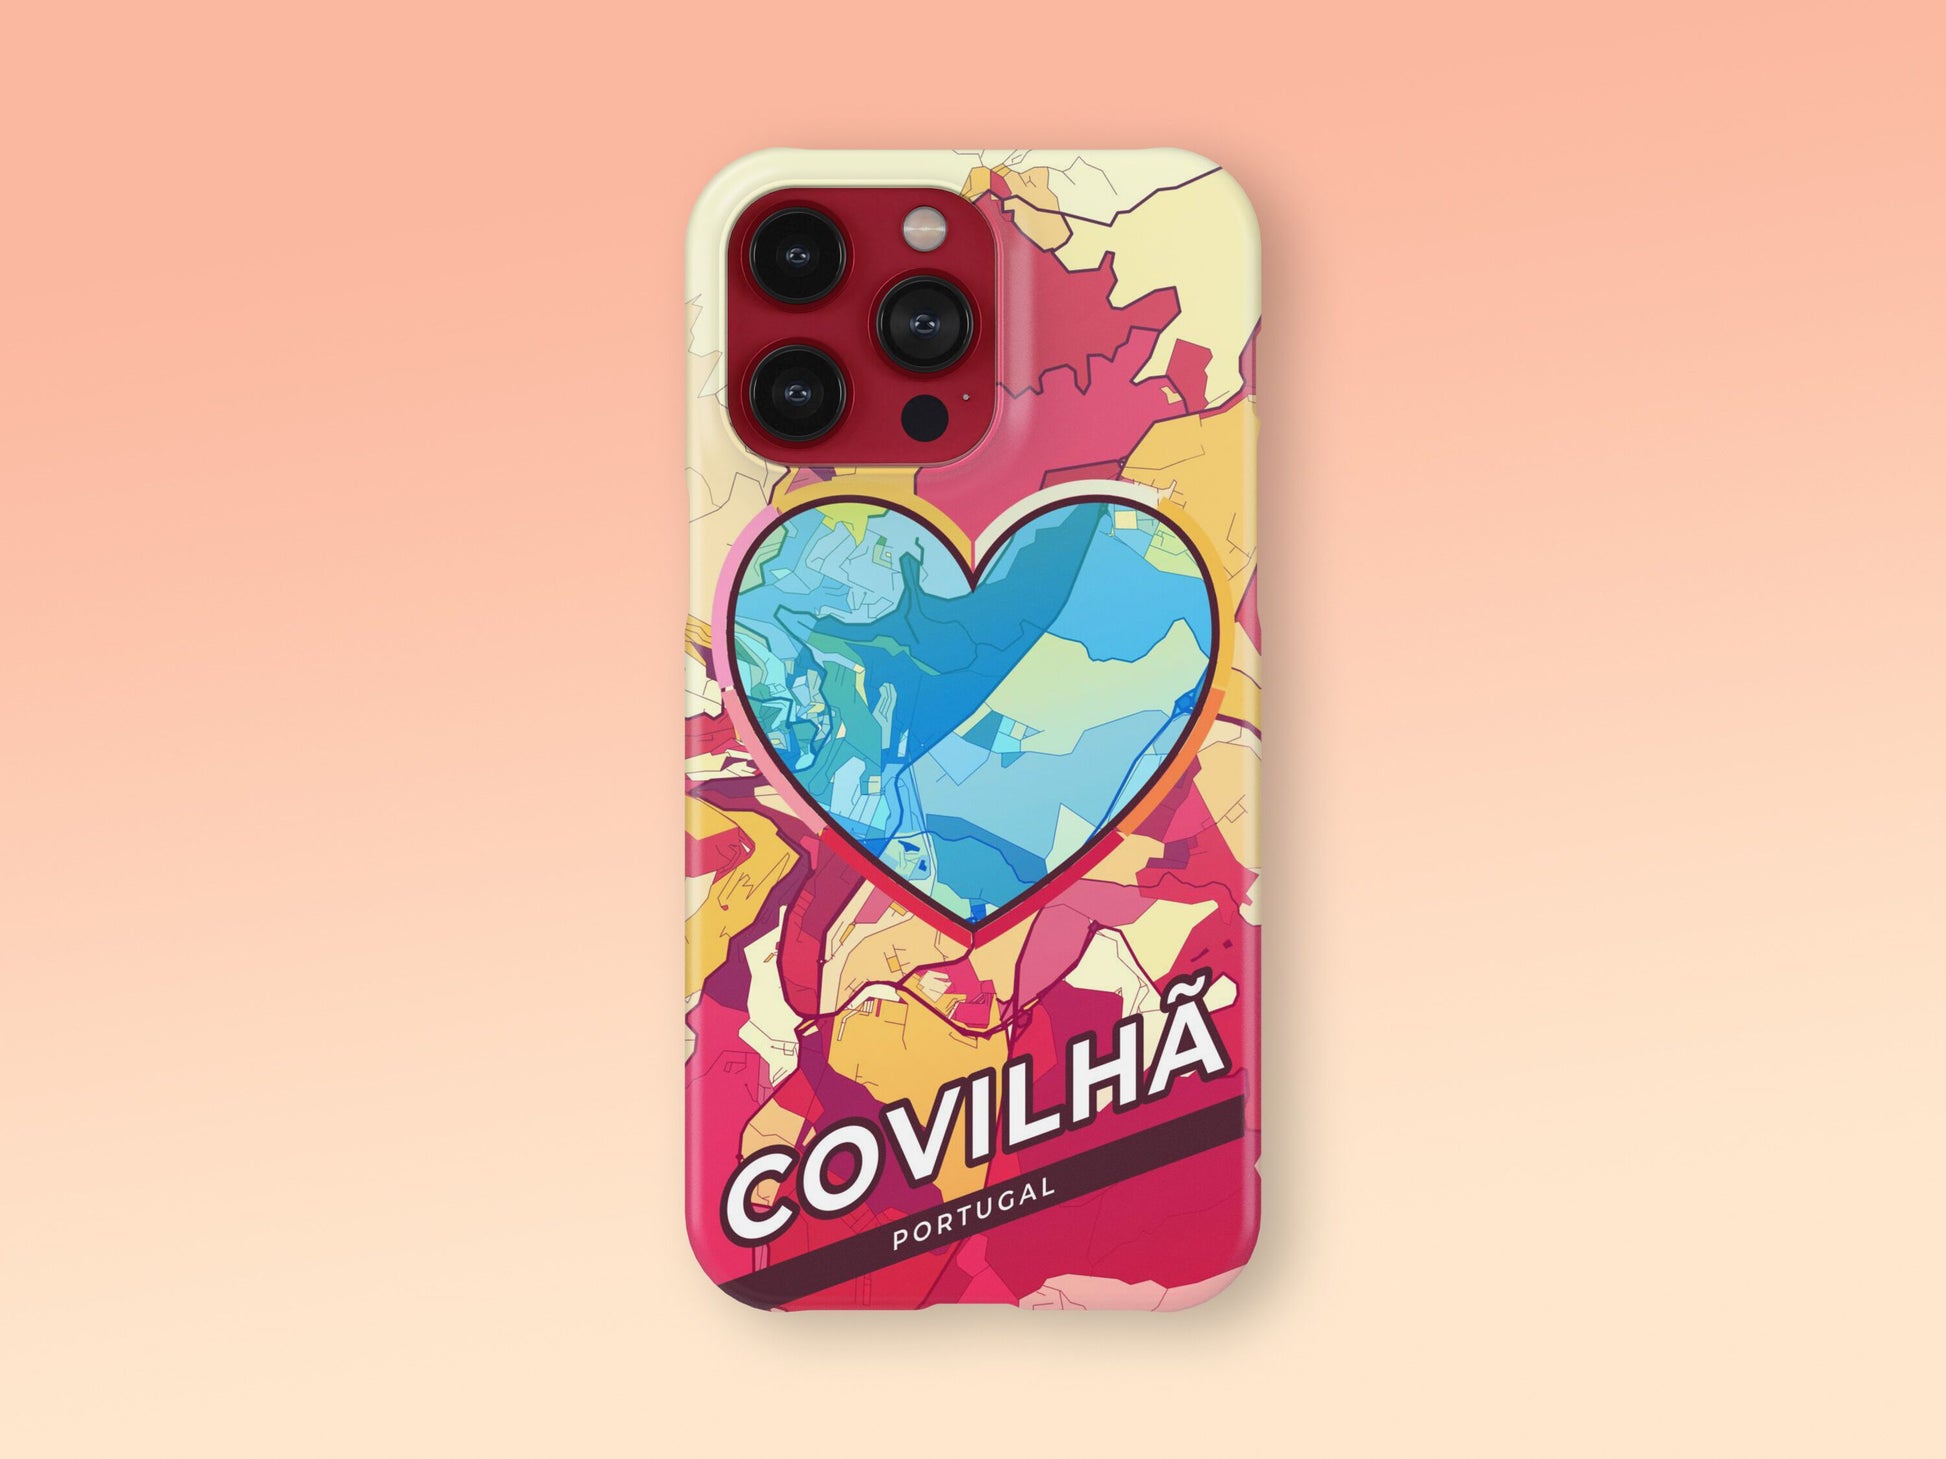 Covilhã Portugal slim phone case with colorful icon. Birthday, wedding or housewarming gift. Couple match cases. 2